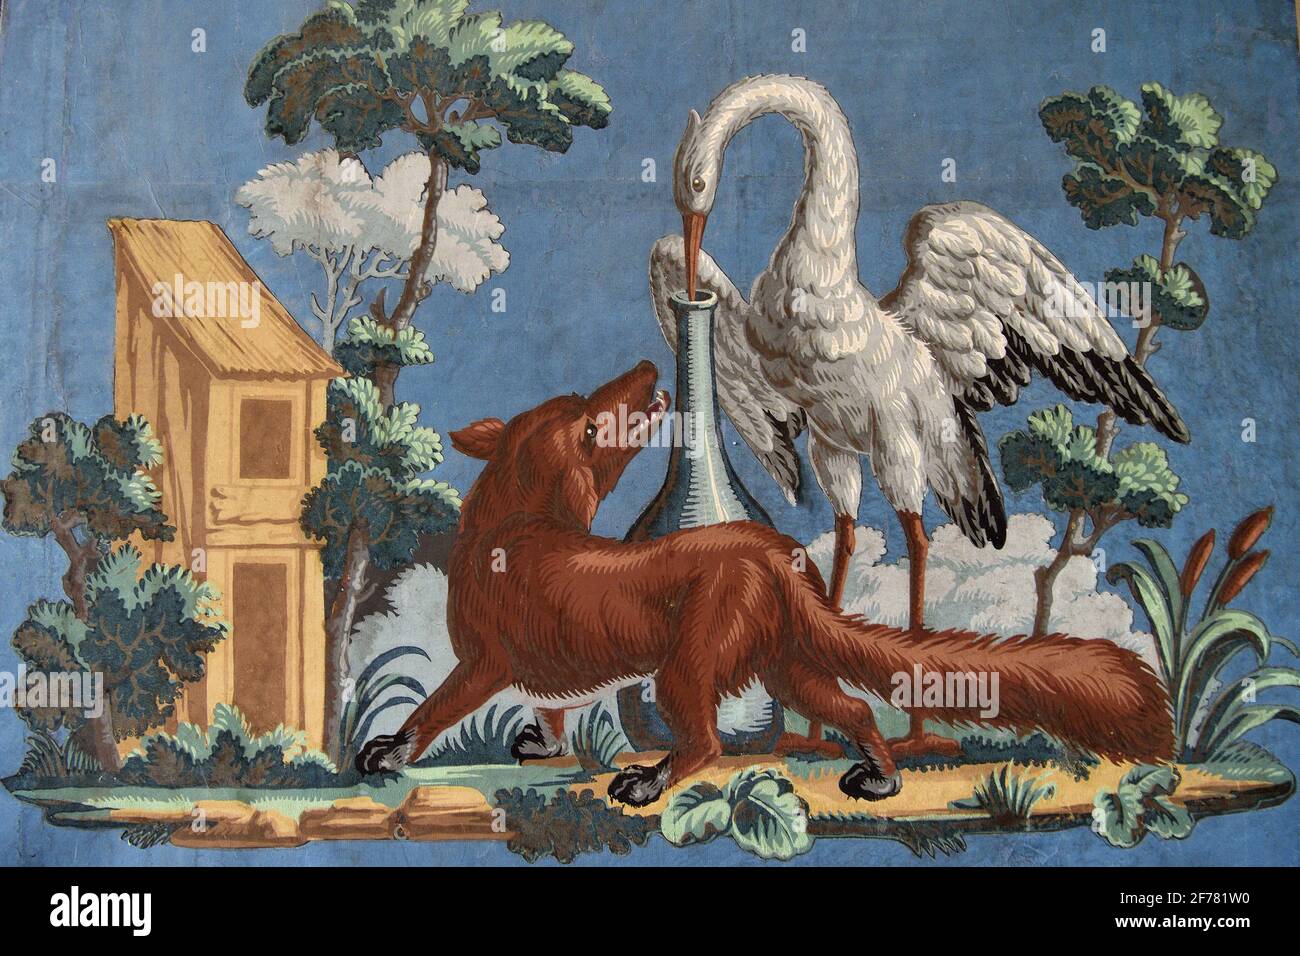 France, Aisne, Château-Thierry, Jean de La Fontaine Museum - city of Chateau-Thierry, illustration of the Fable the Fox and the Stork on an 18th century wallpaper after the painter Jean Baptiste Oudry Stock Photo